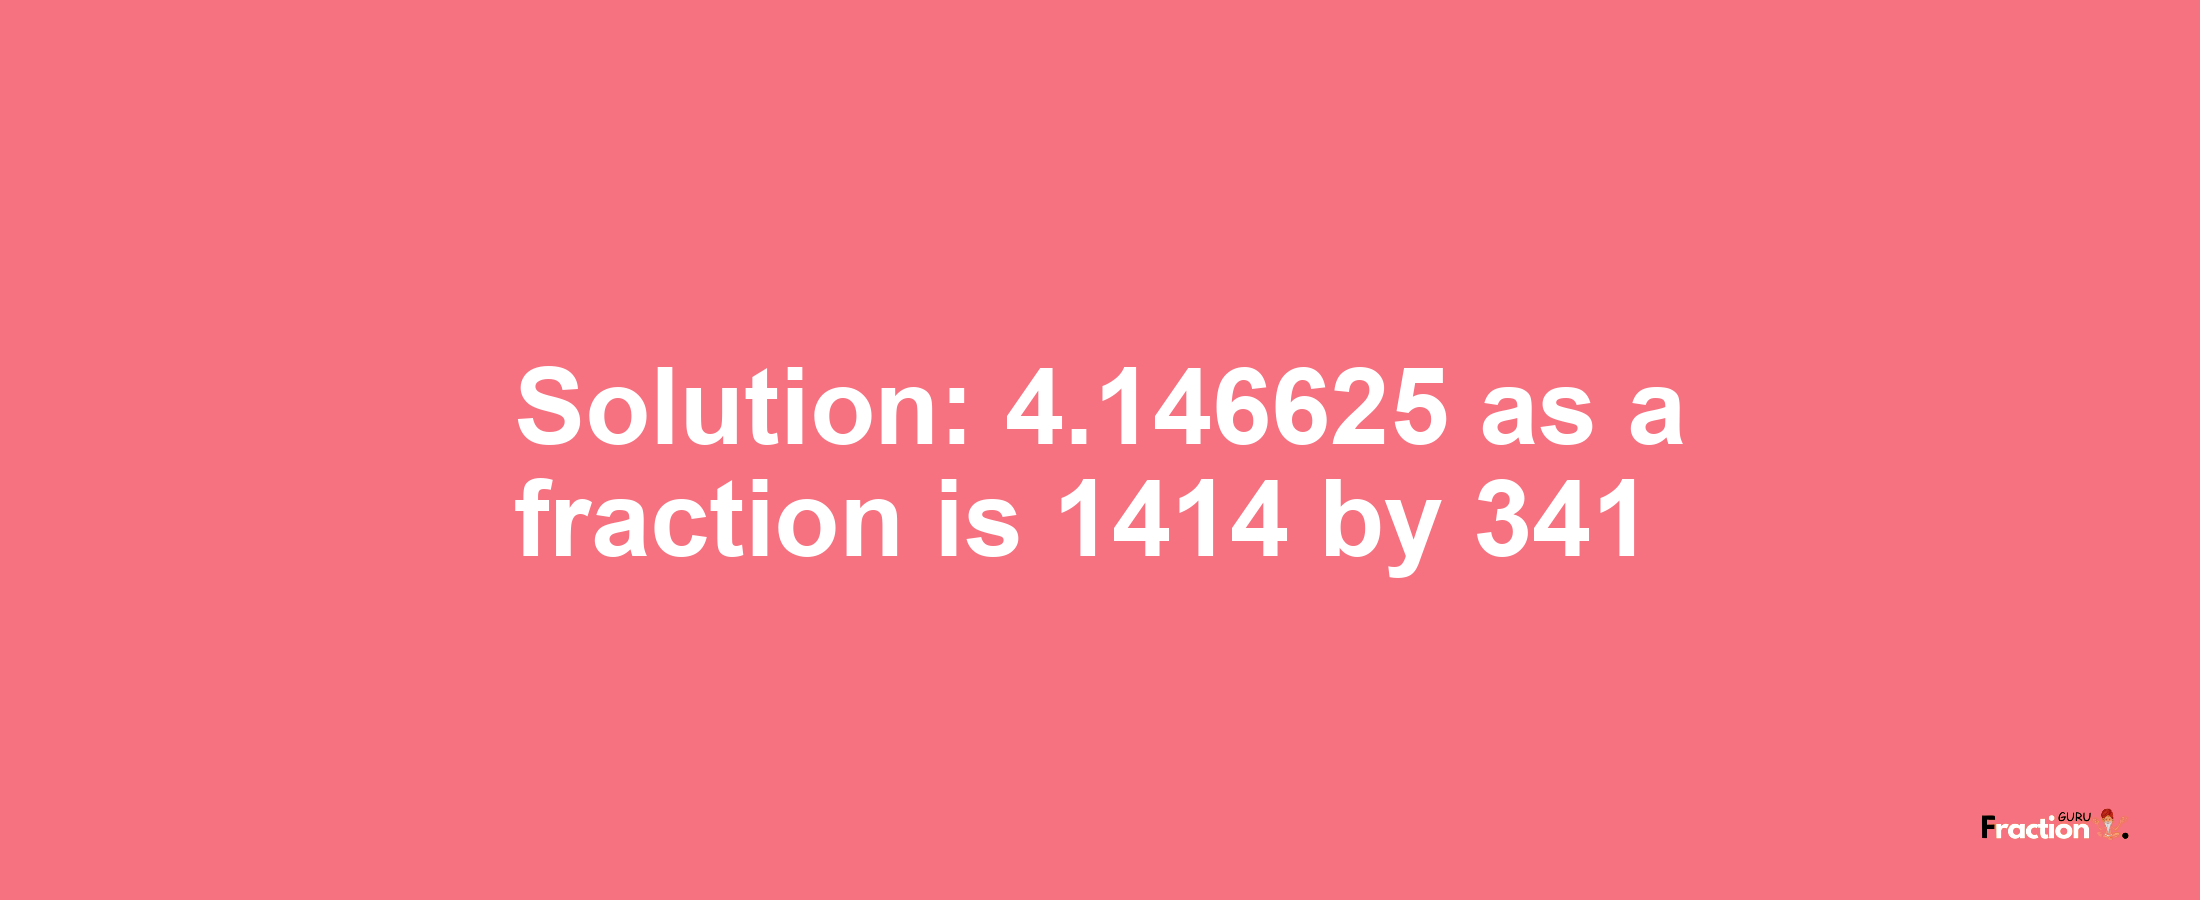 Solution:4.146625 as a fraction is 1414/341